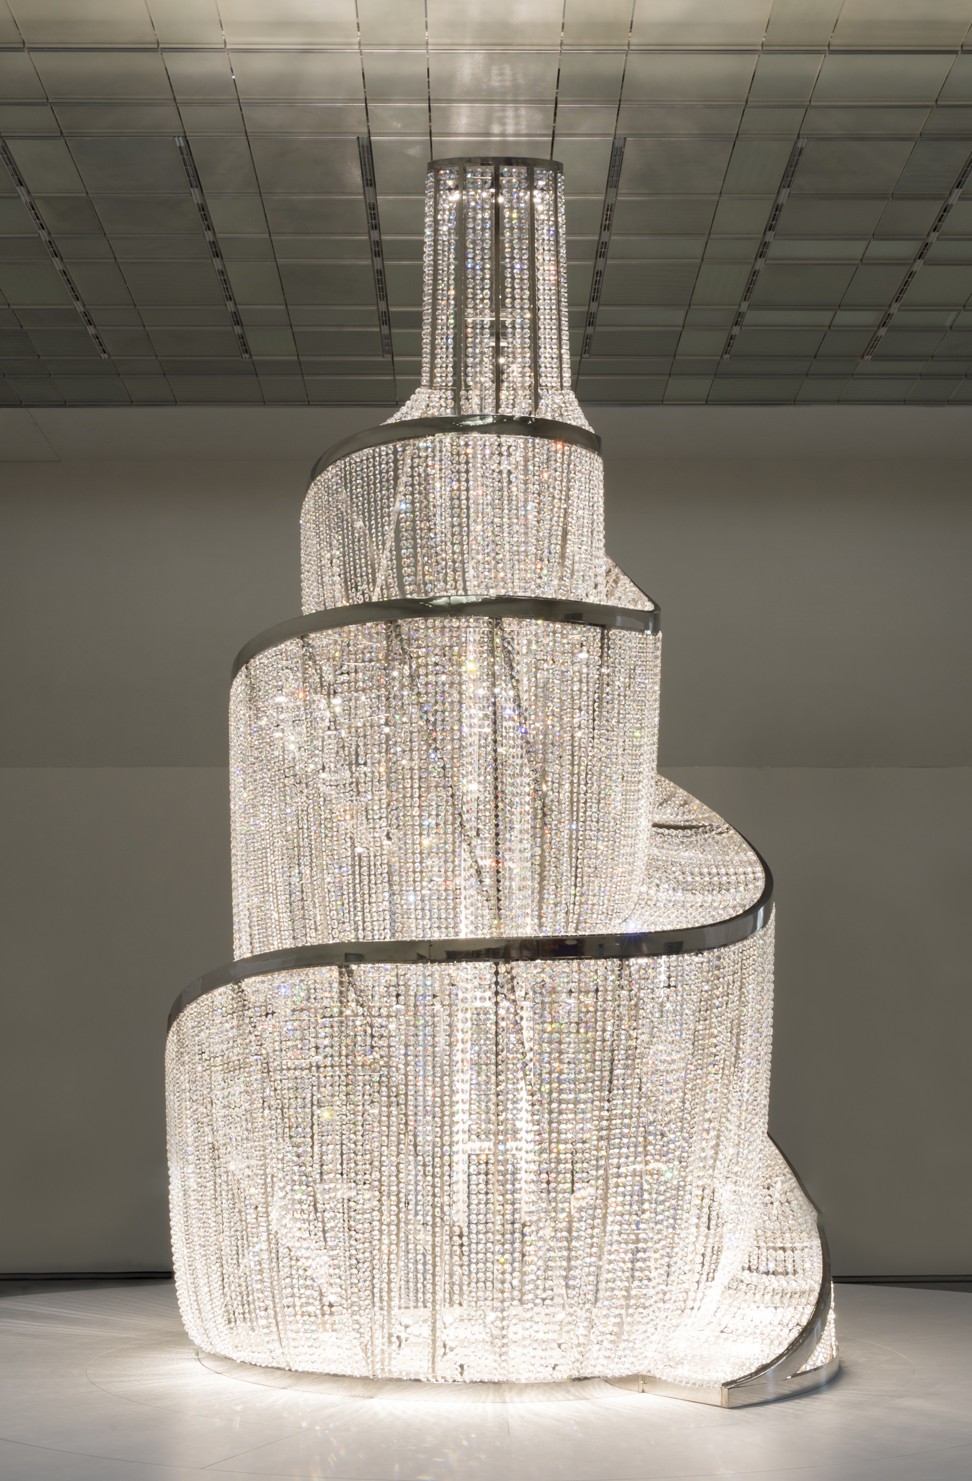 Chinese artist Ai Weiwei’s 7-metre-high, chandelier-inspired crystal and steel Fountain of Light at the Louvre Abu Dhabi. Photo: Louvre Abu Dhabi